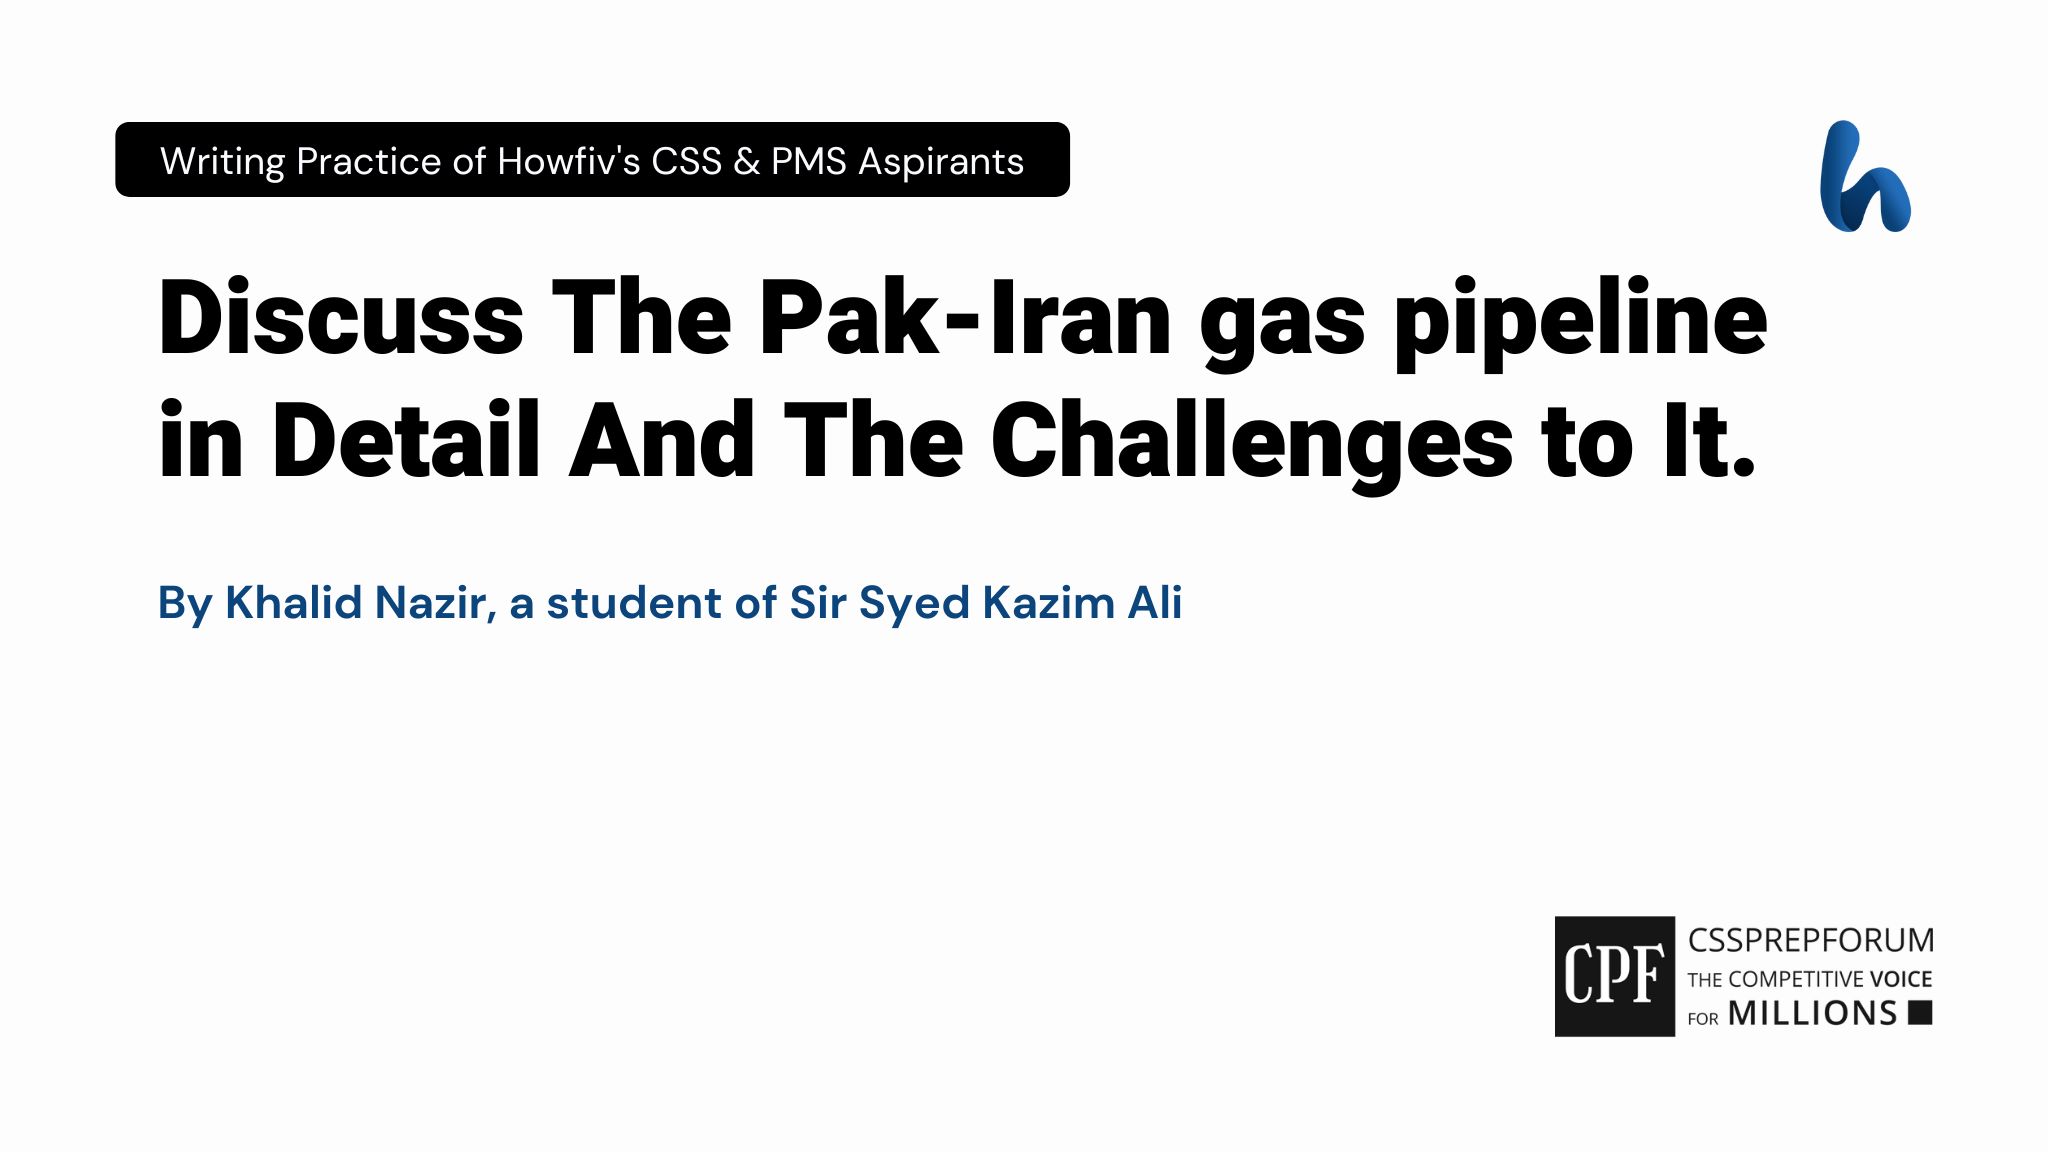 Discuss The Pak-Iran gas pipeline in Detail And The Challenges to It.